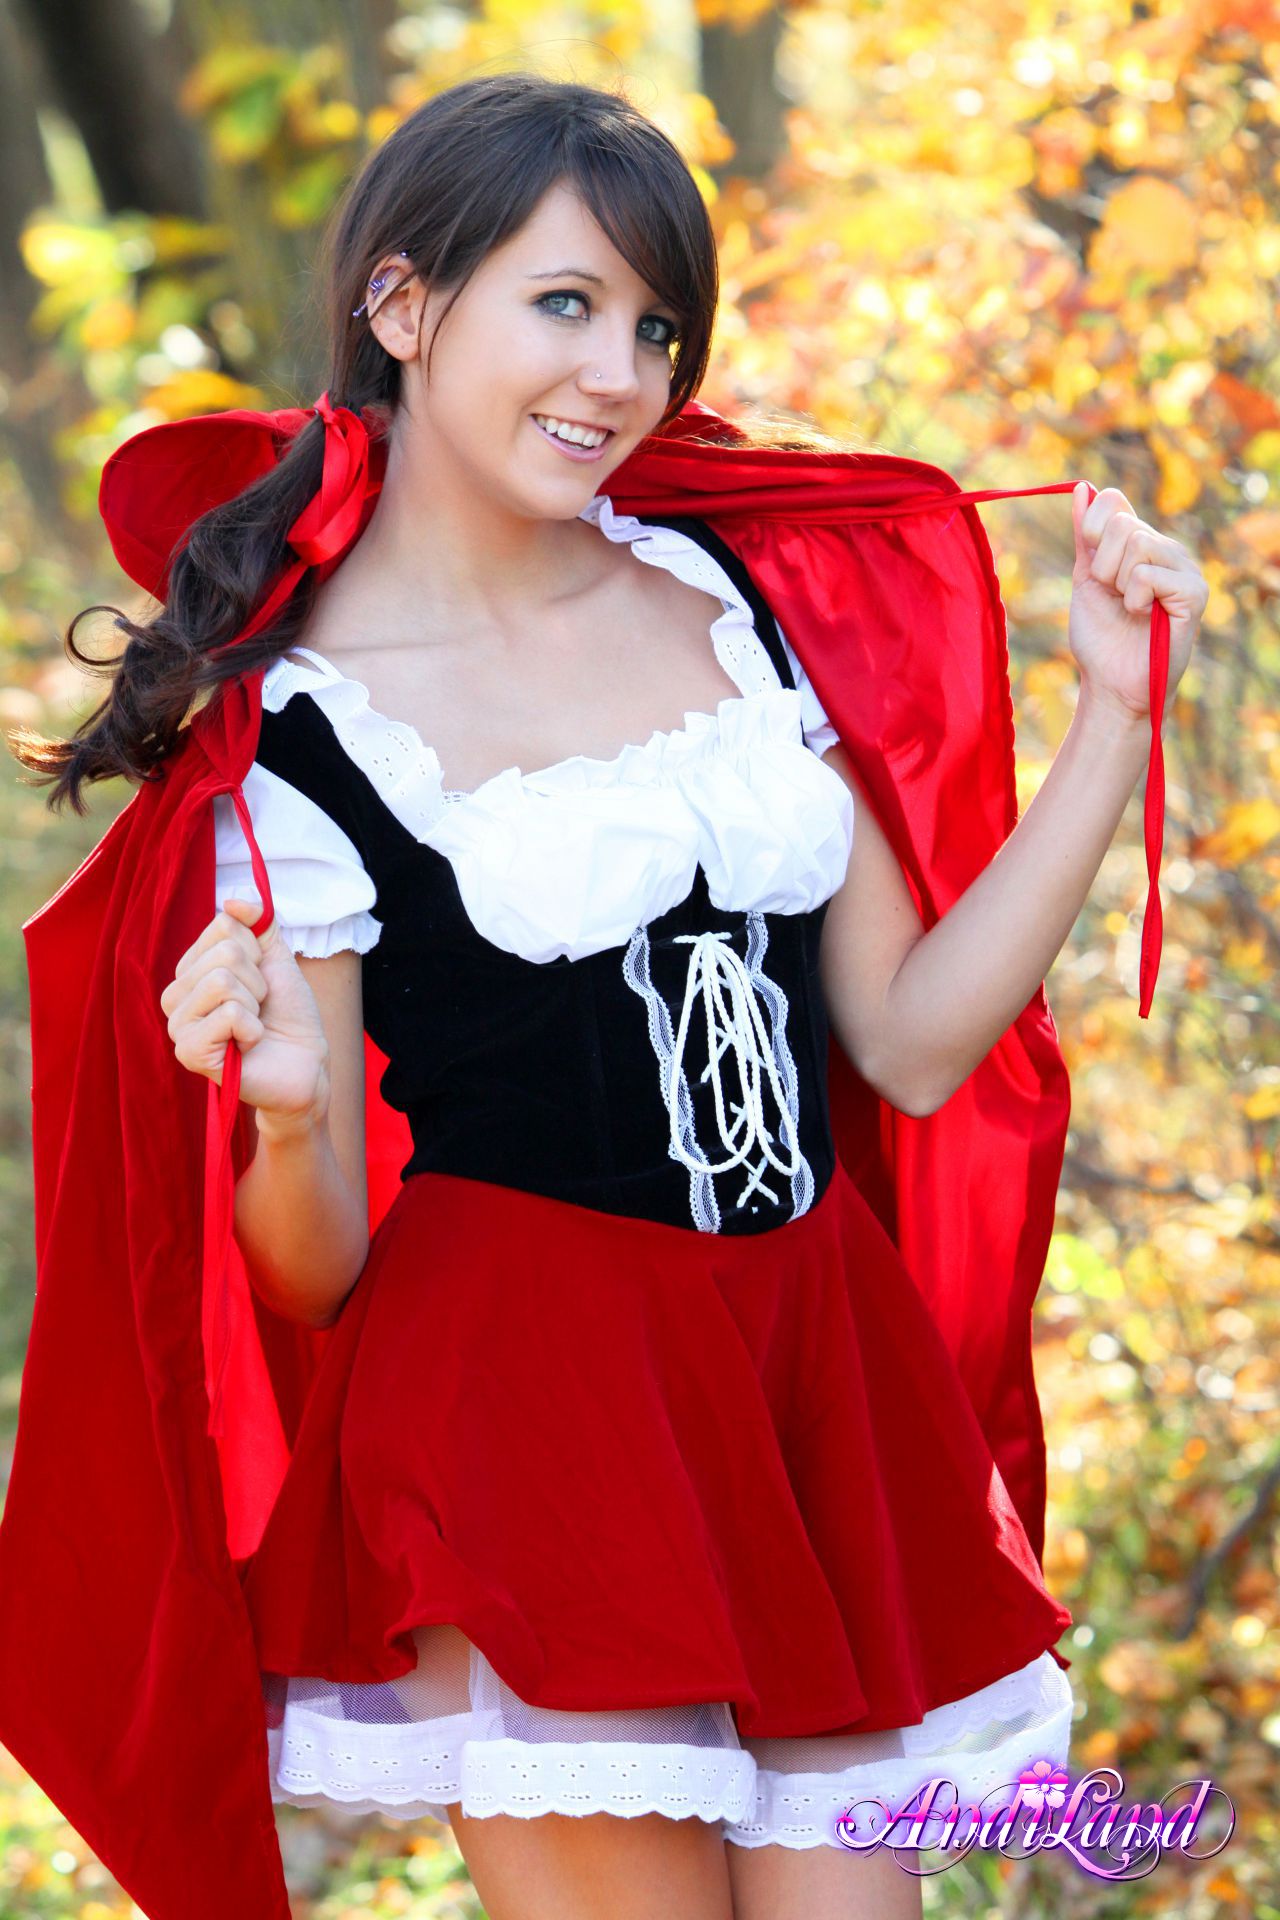 Andi Land Little Red Riding Hood